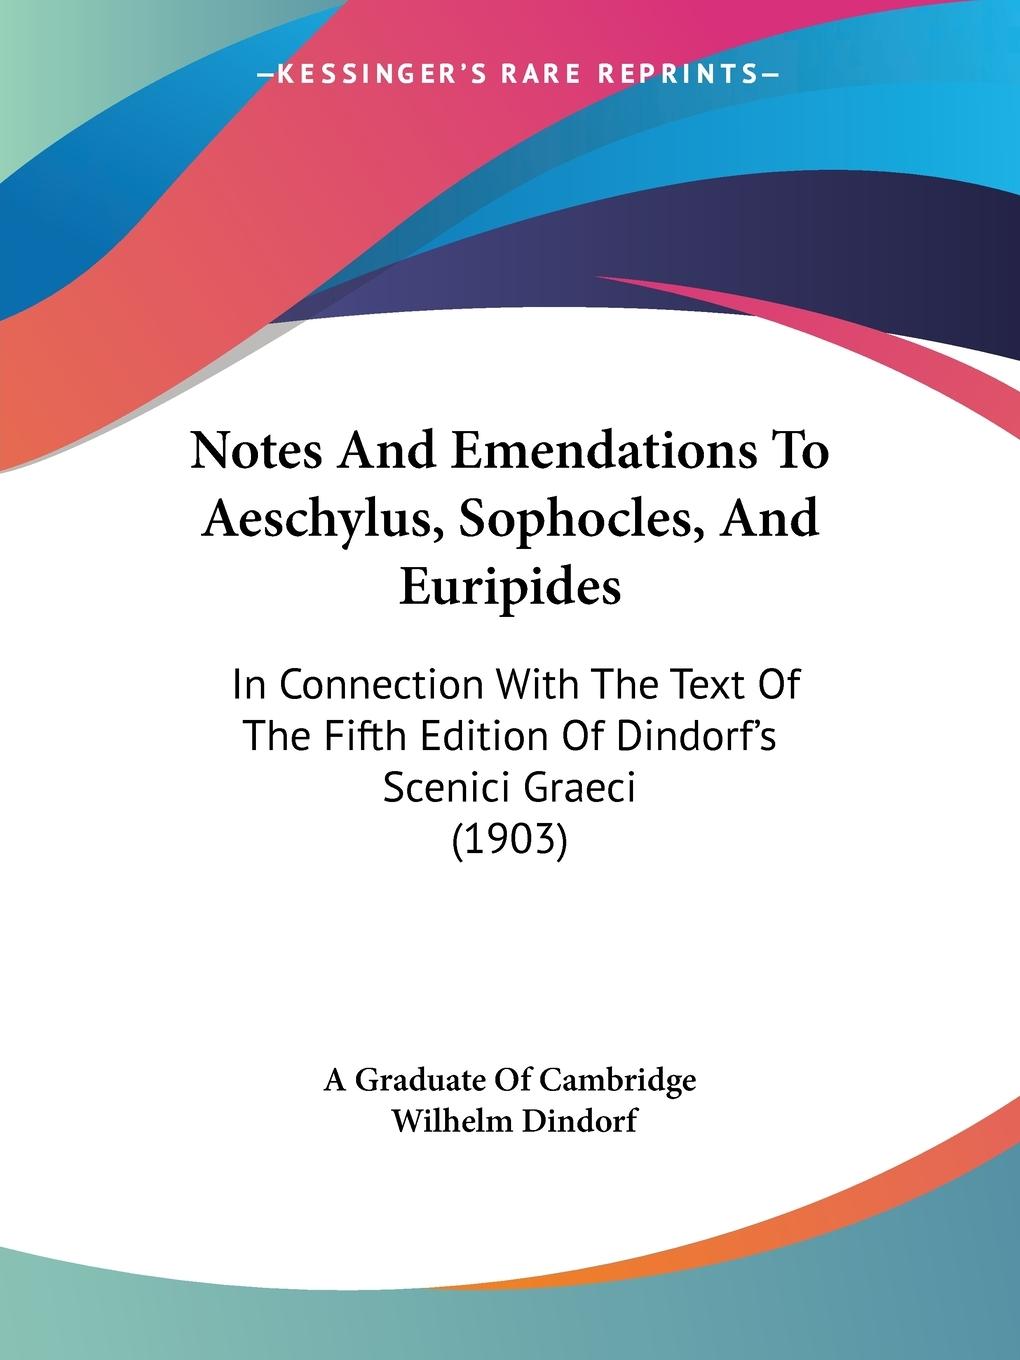 Notes And Emendations To Aeschylus, Sophocles, And Euripides - A Graduate Of Cambridge Dindorf, Wilhelm